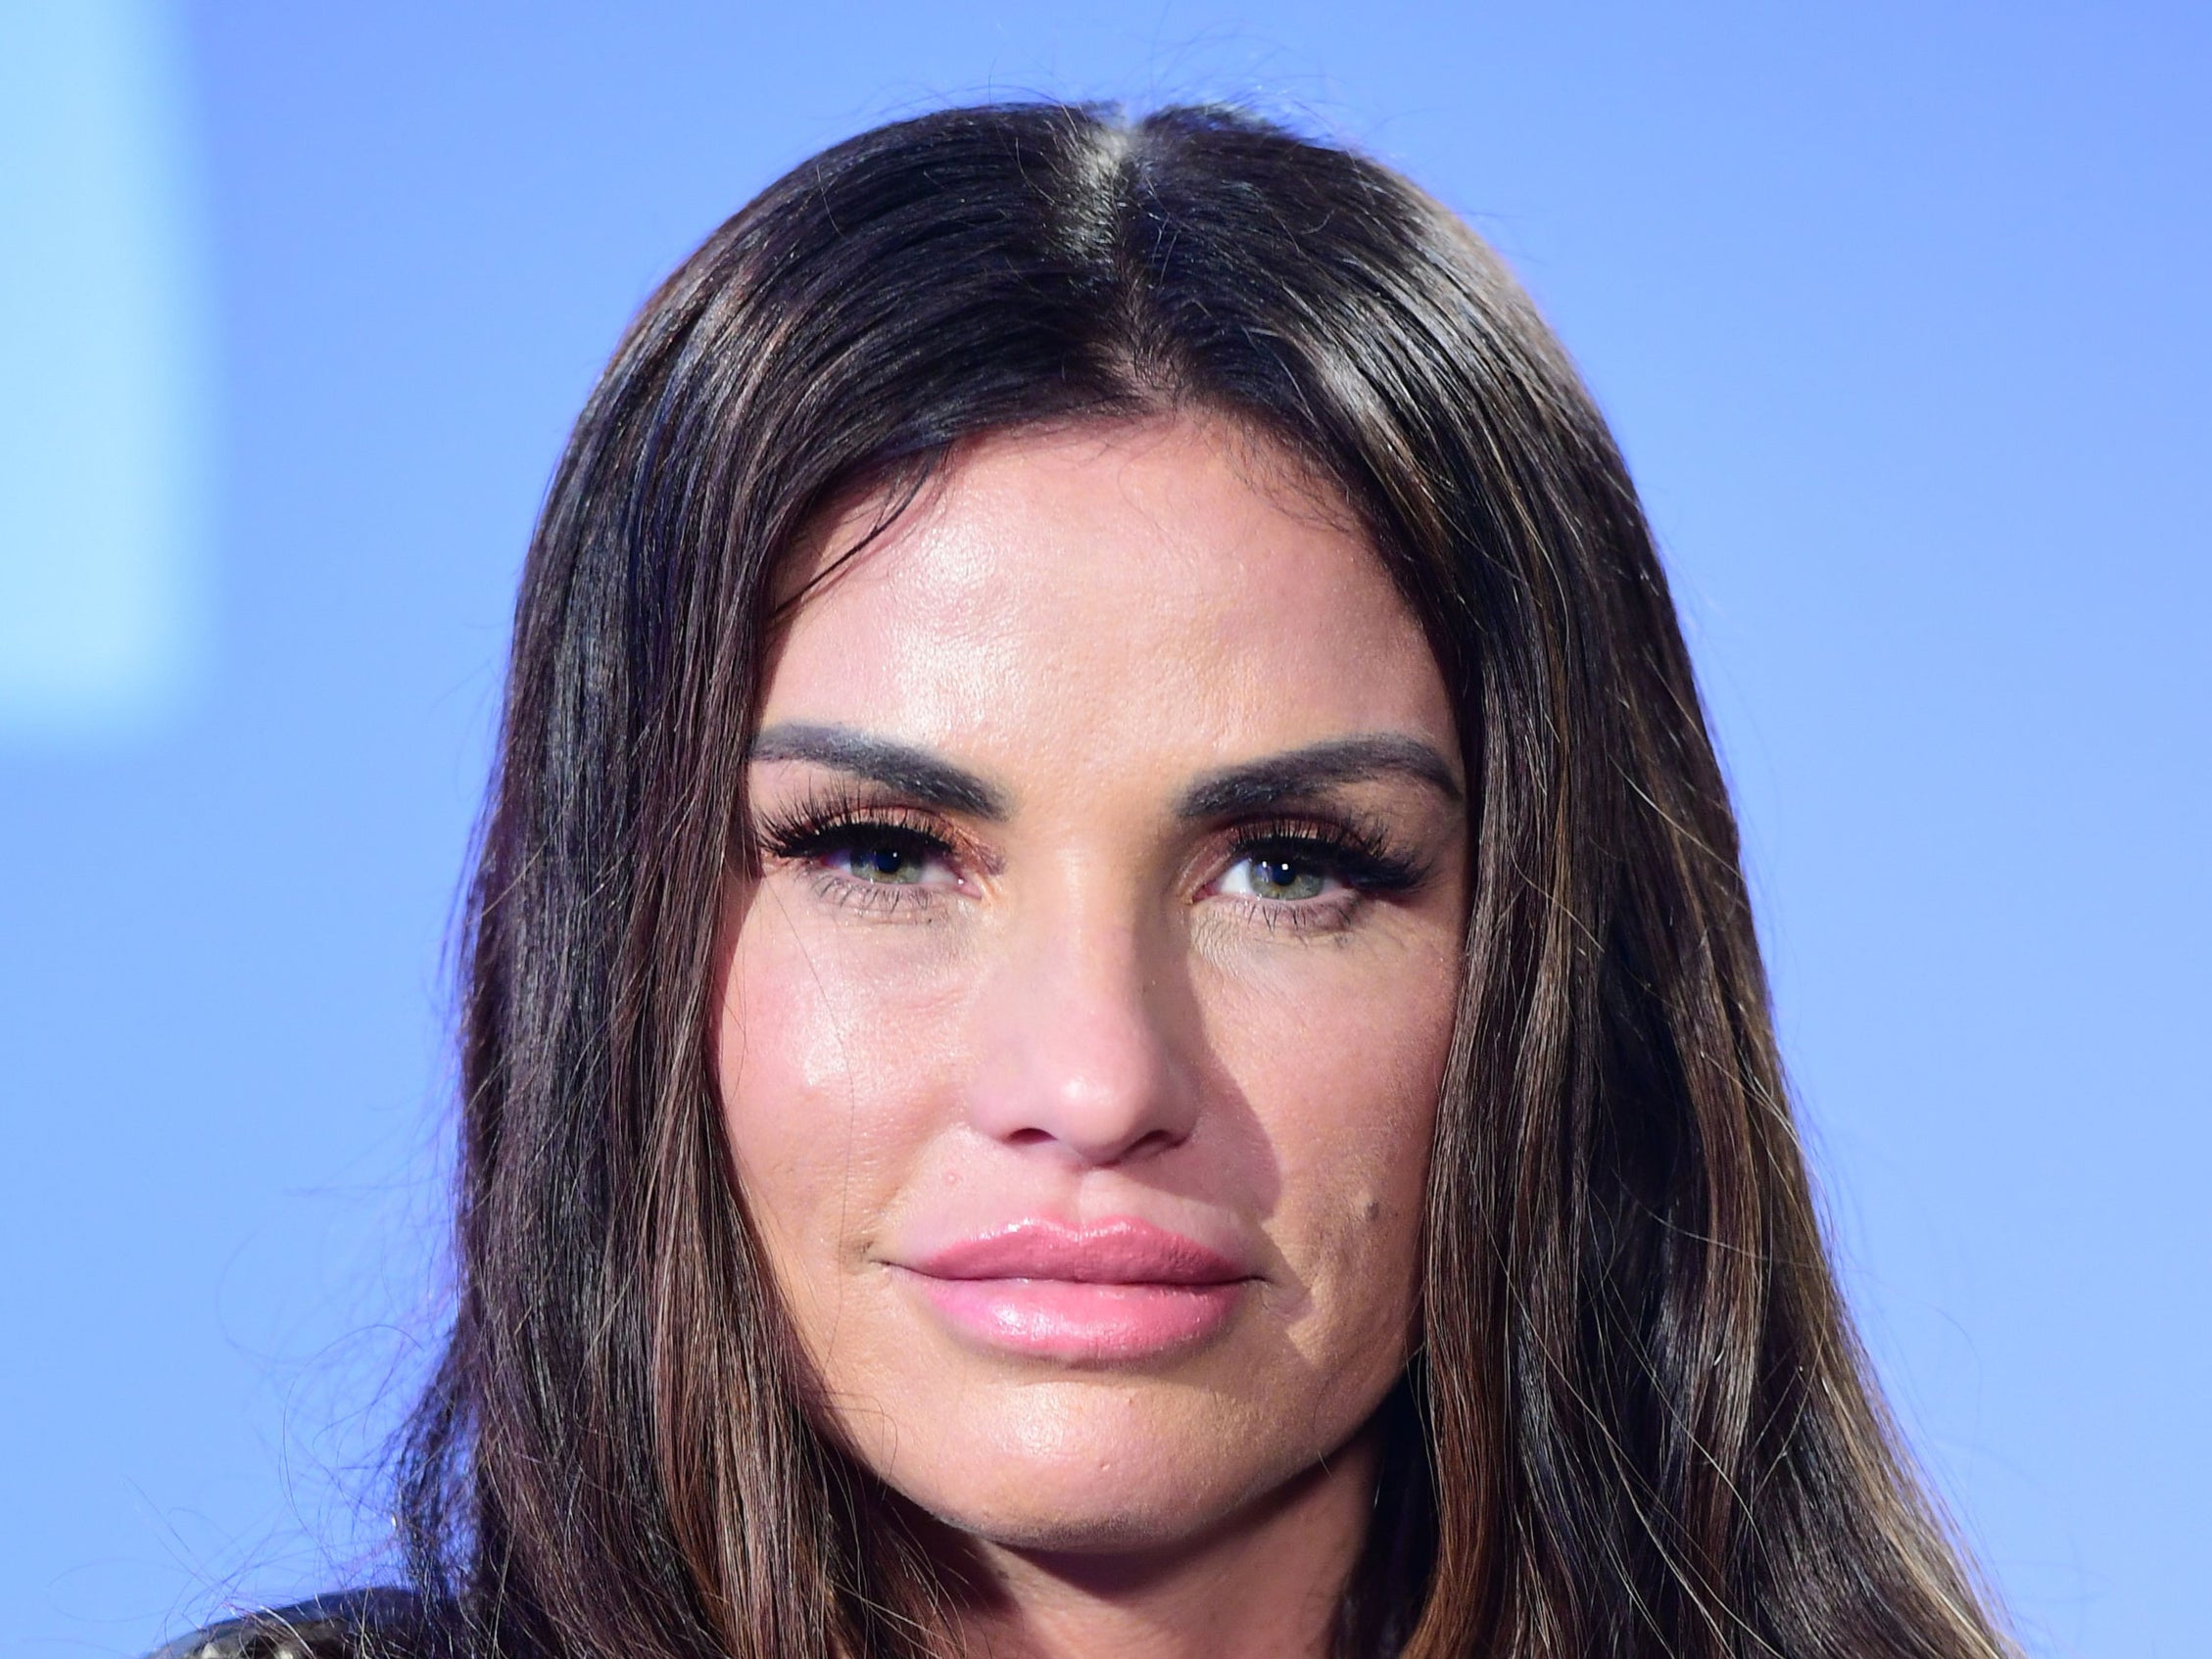 Katie Price rose to fame as the model Jordan before becoming a reality TV star